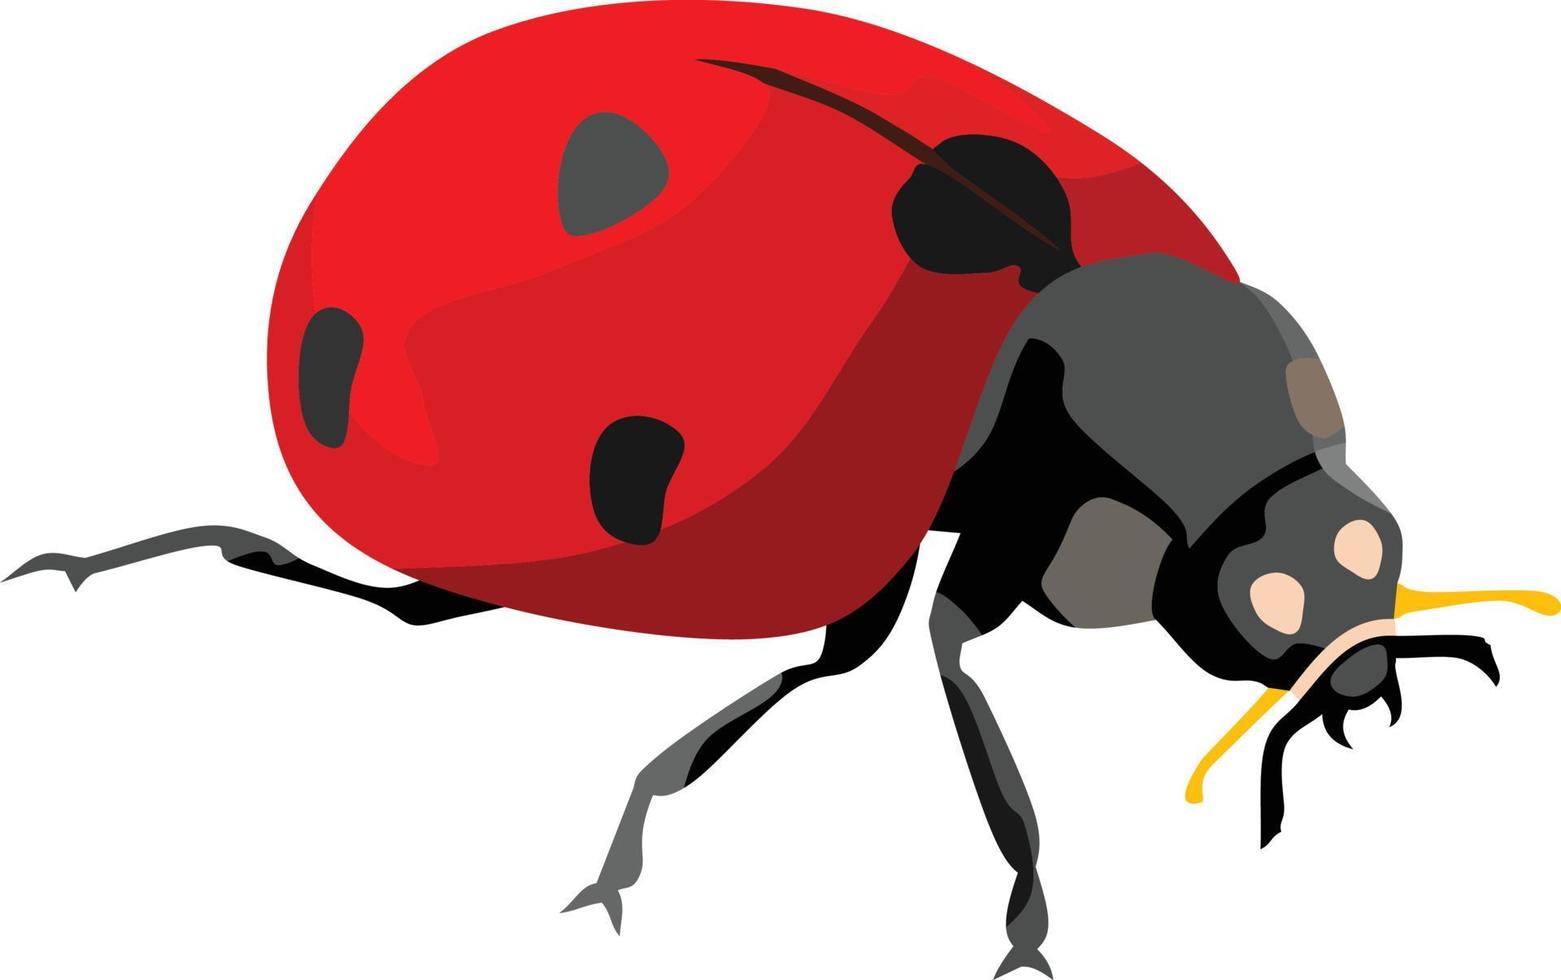 Lady Bug Insect Animal Vector